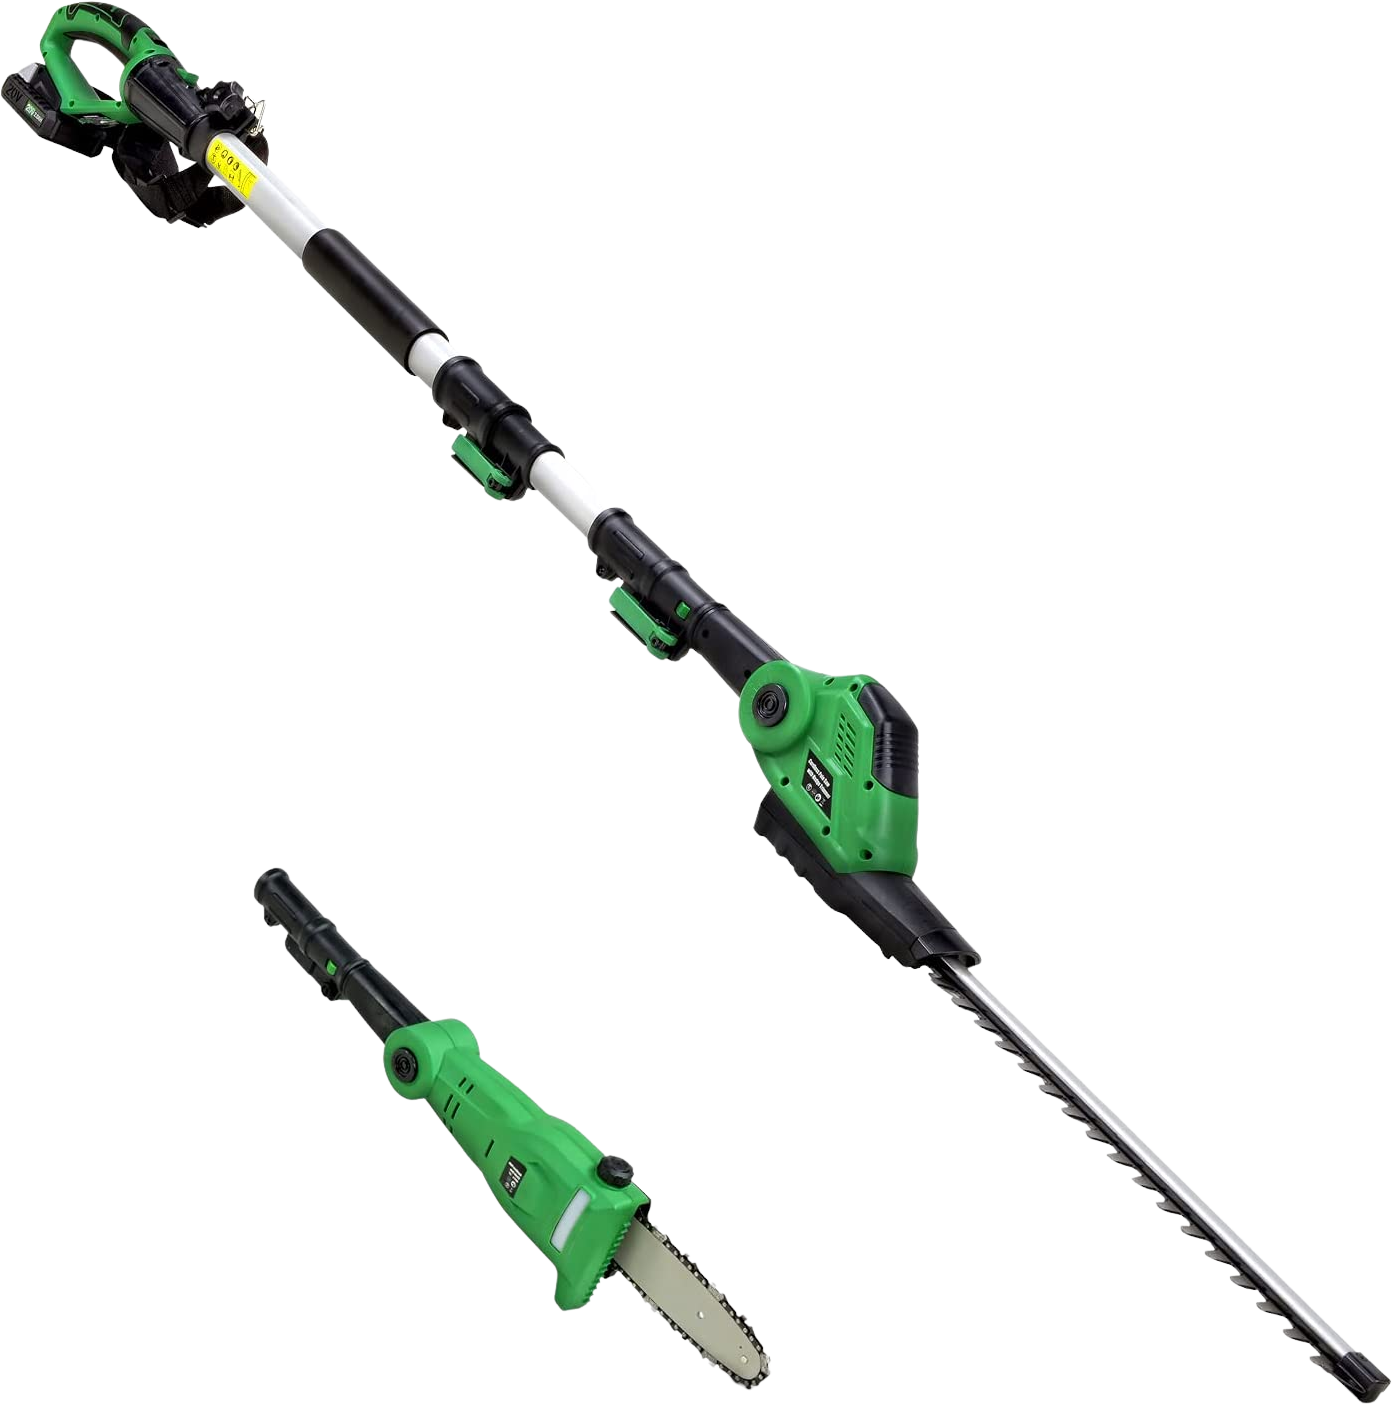 Apollo Smart, Apollo Smart GUT100 2 in 1 Pole 18" 20V 2Ah Electric Saw and Hedge Trimmer New